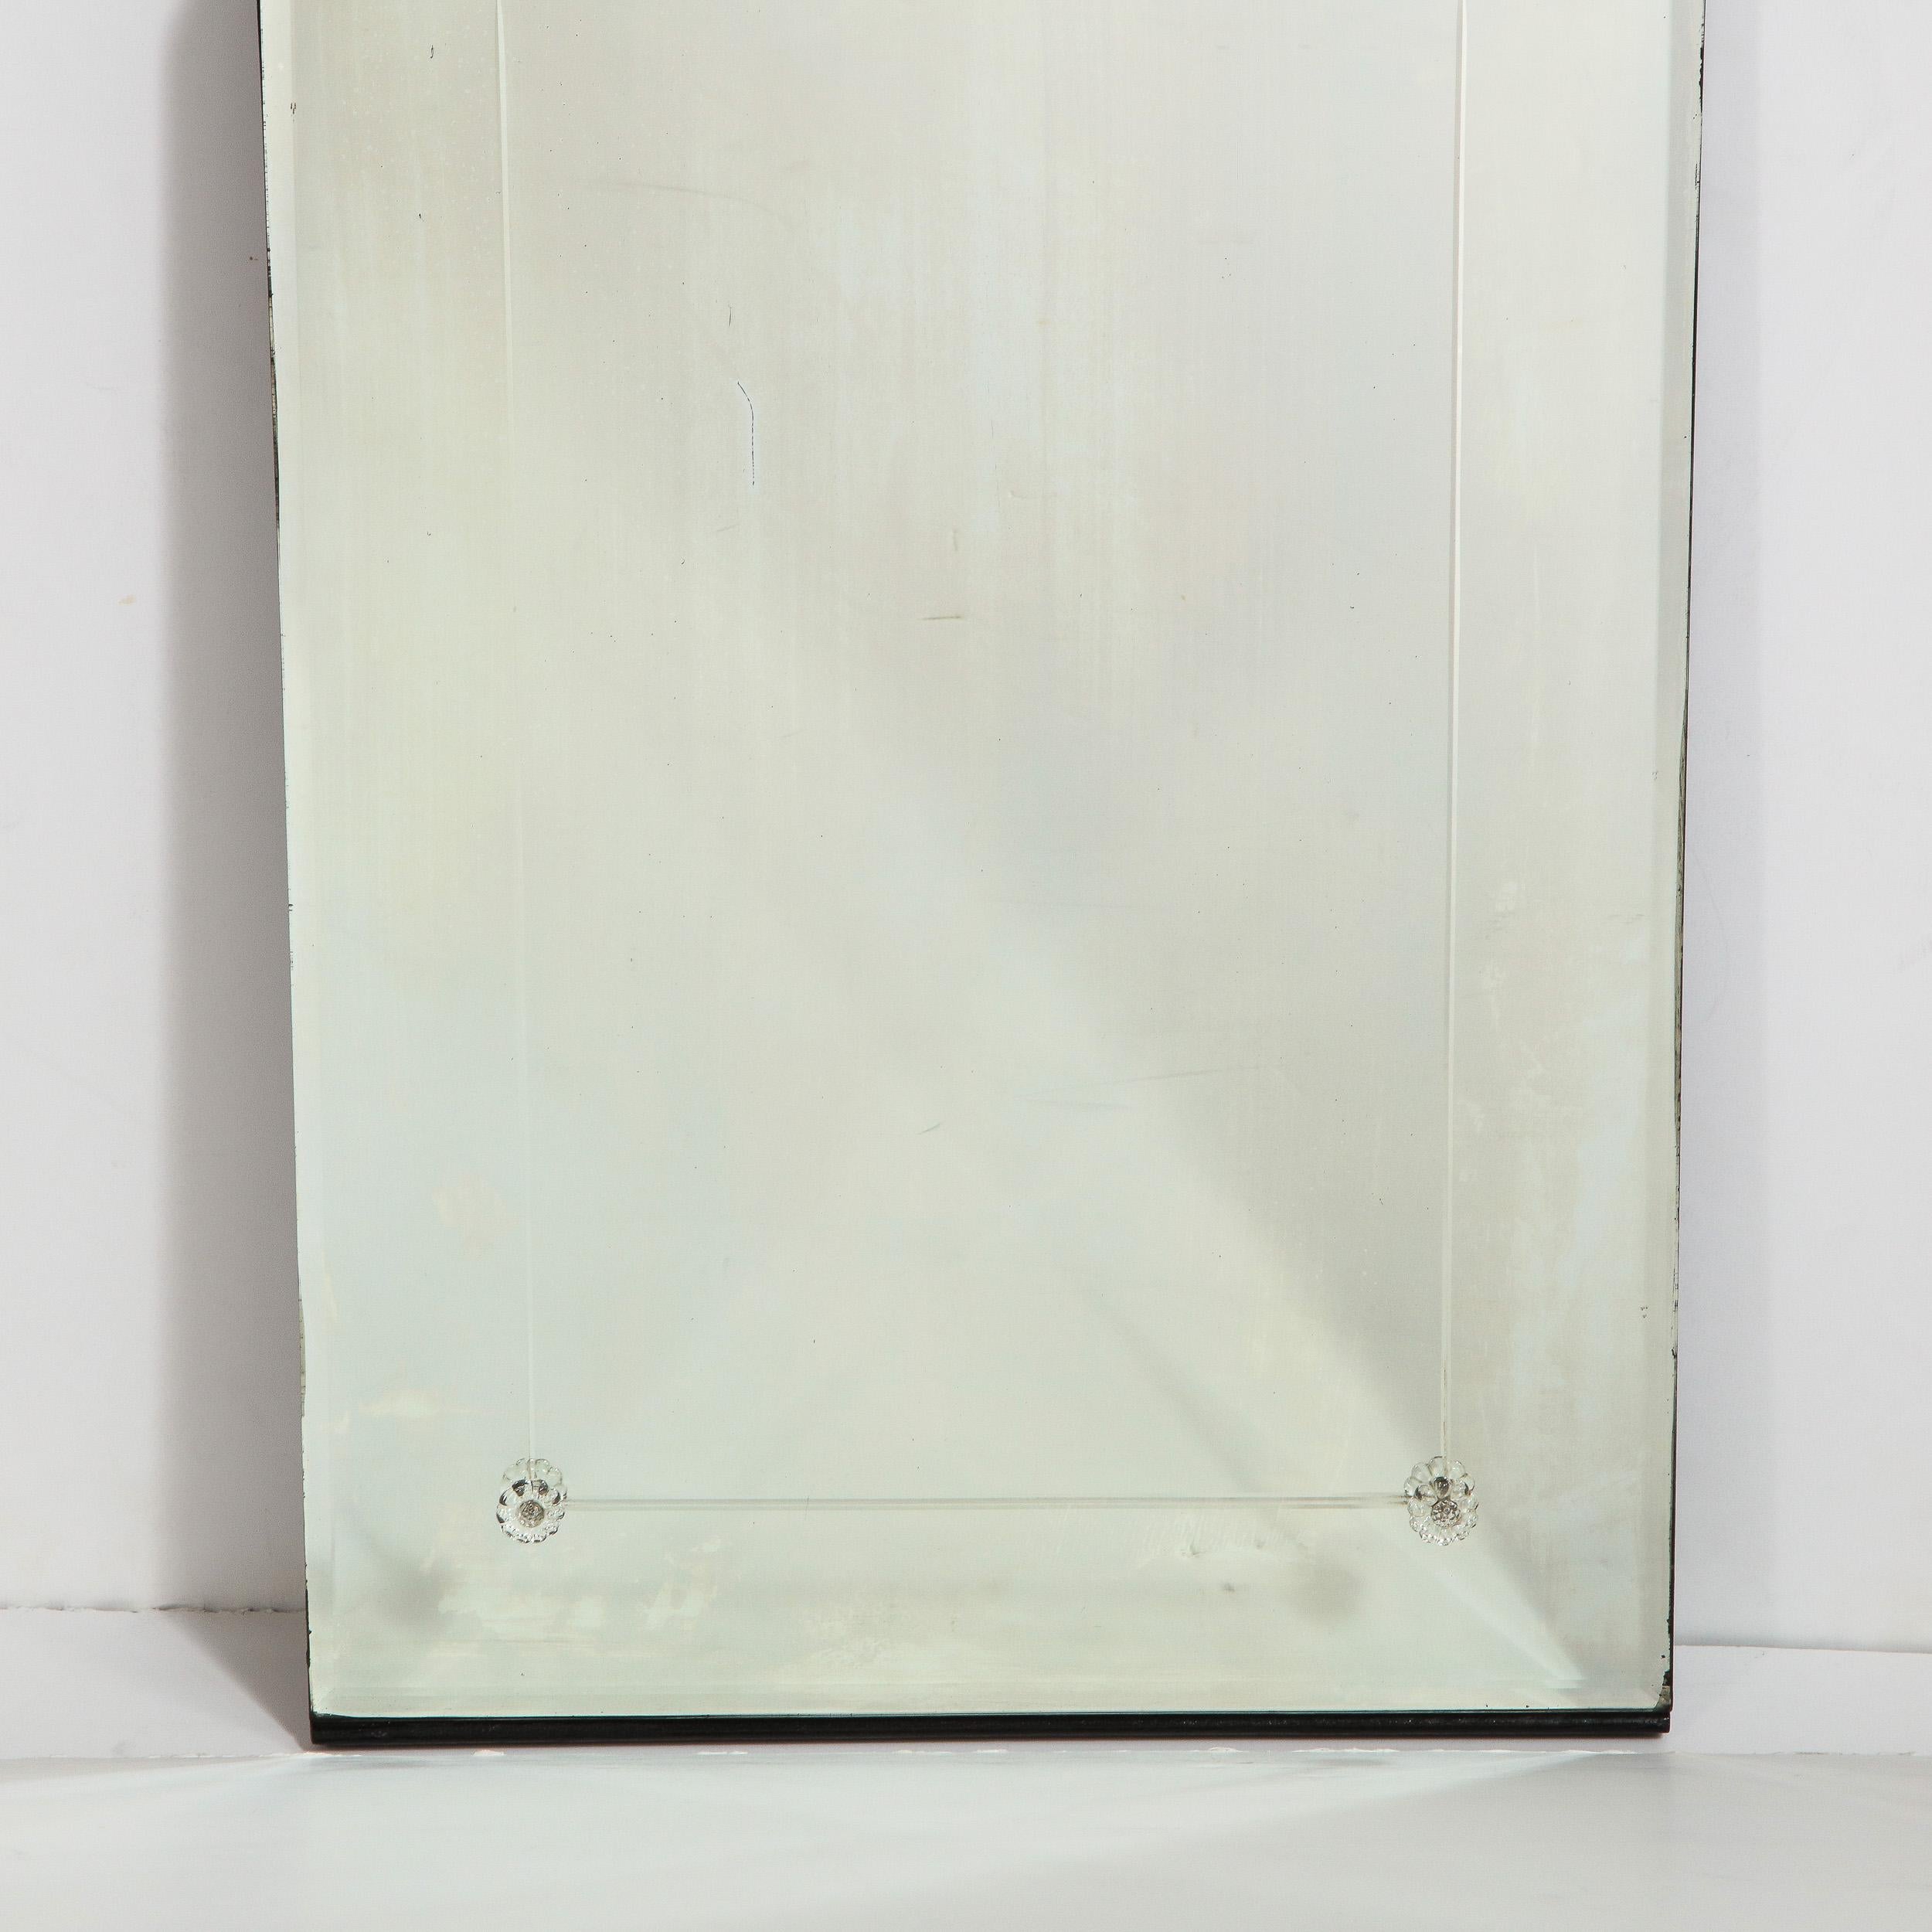 Mid-Century Modern Art Deco Mirror with Laurel Wreath Detailing, Chain Beveling & Scalloped Borders